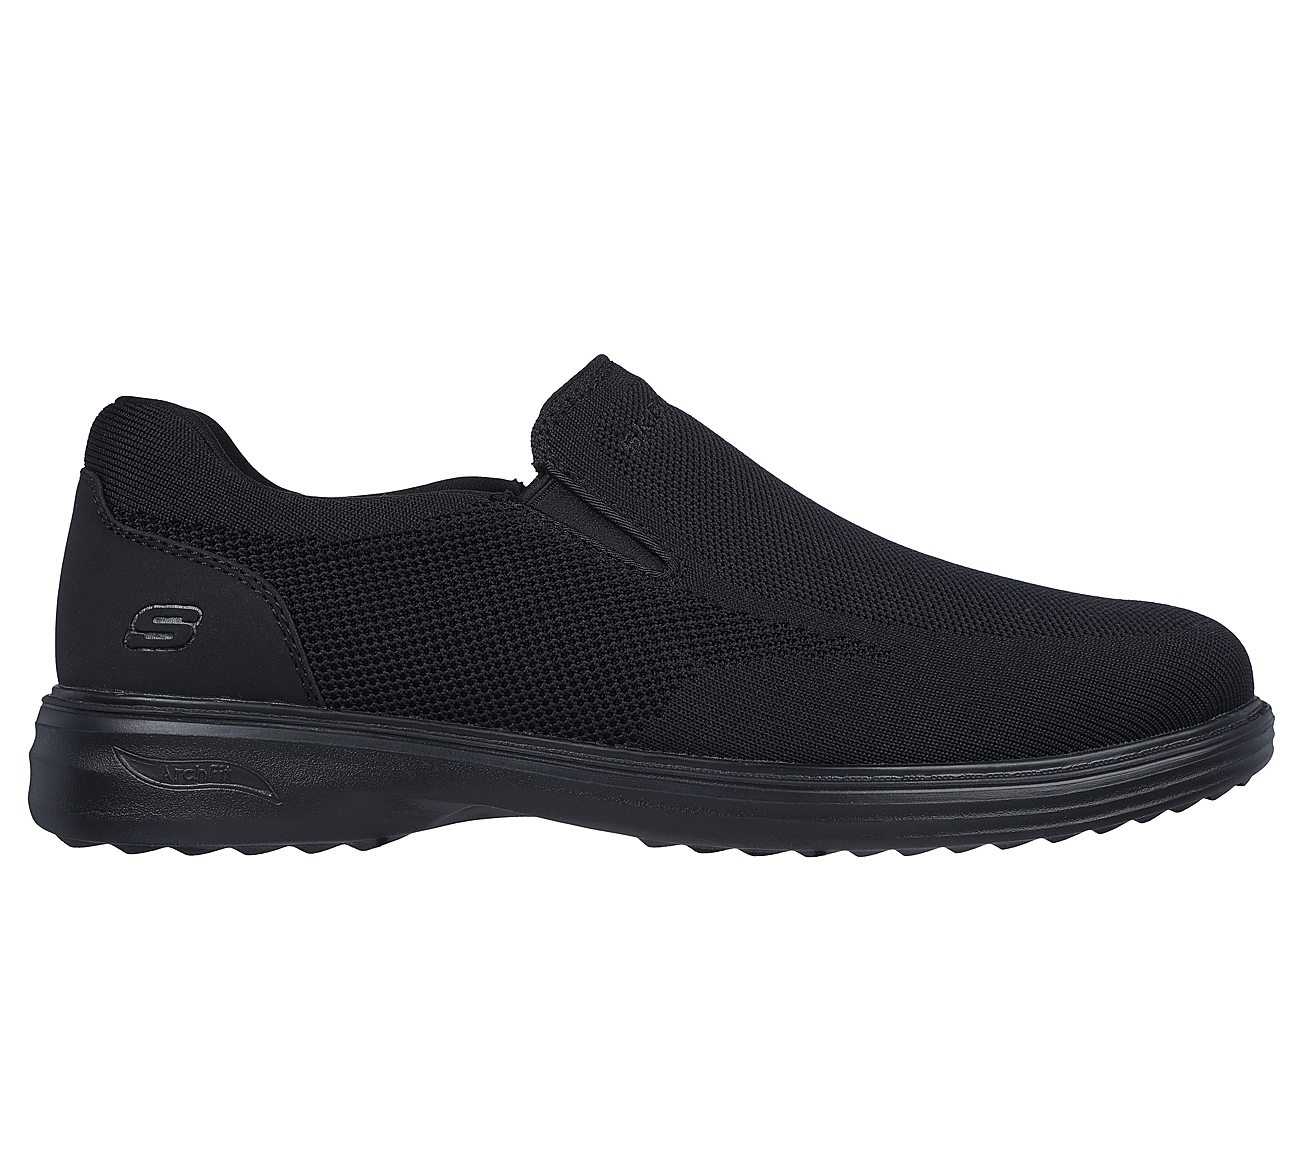 ARCH FIT OGDEN, BBLACK Footwear Lateral View